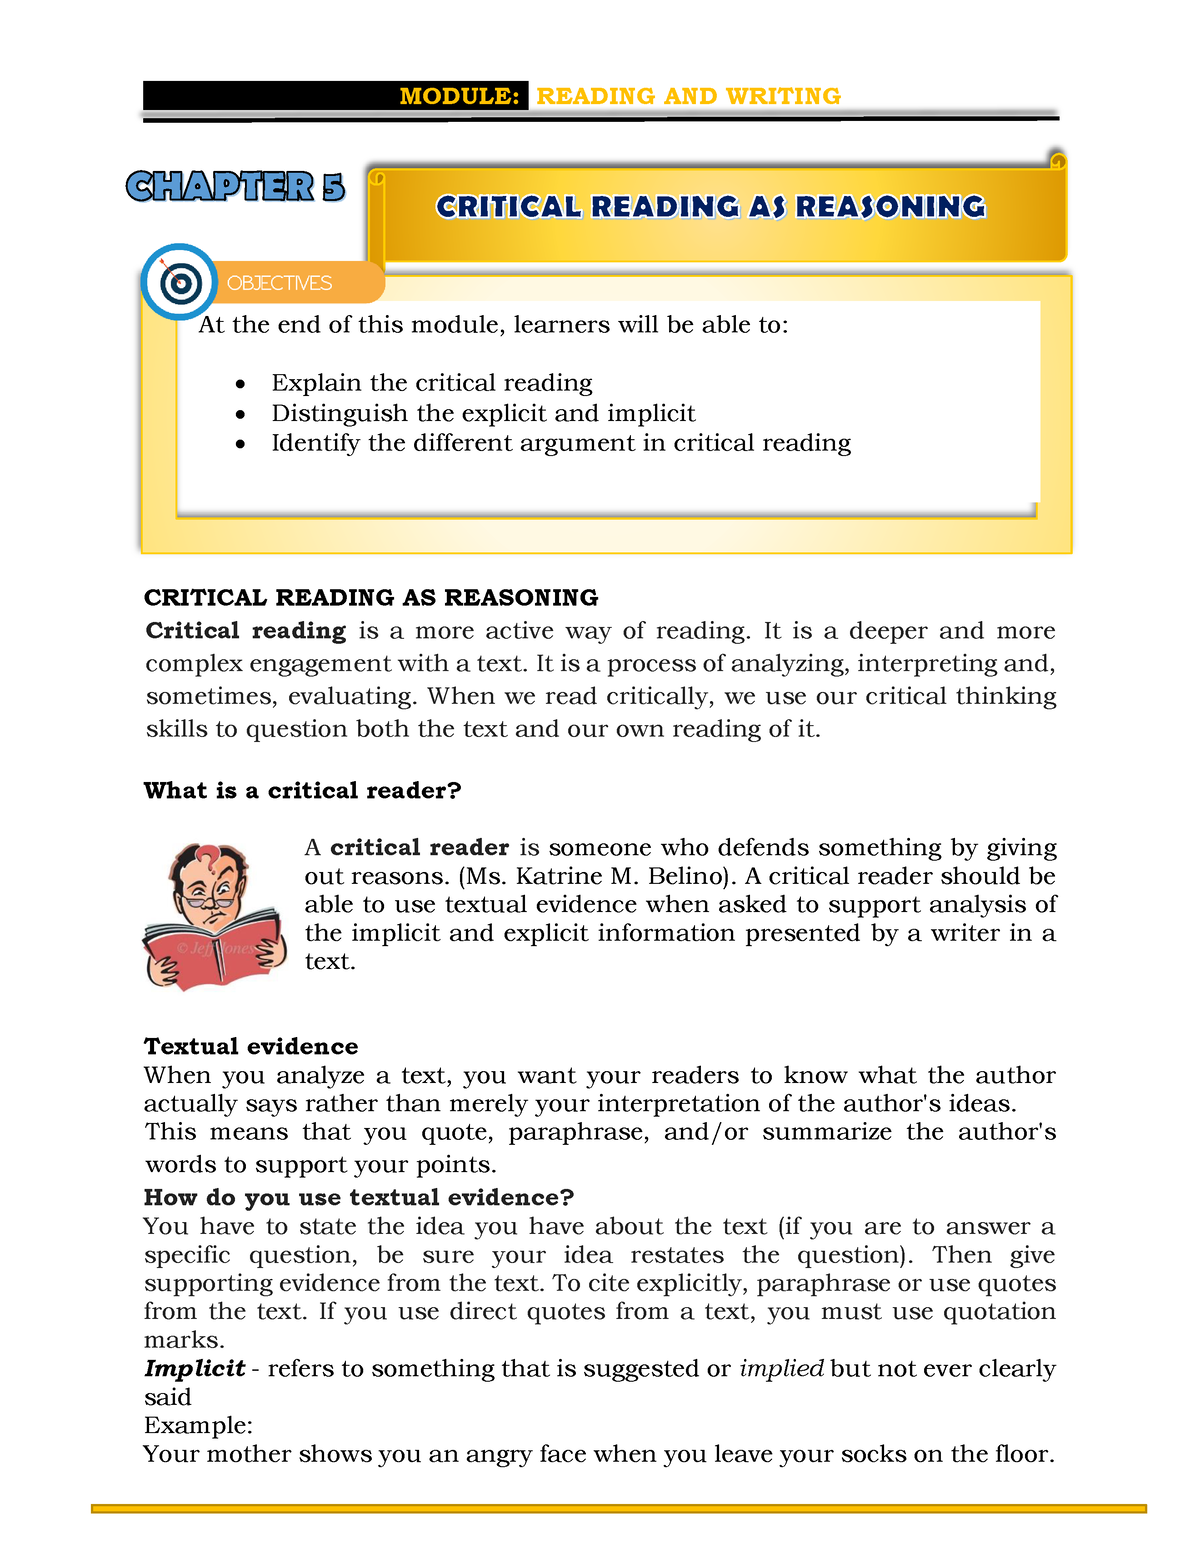 critical reading as reasoning essay